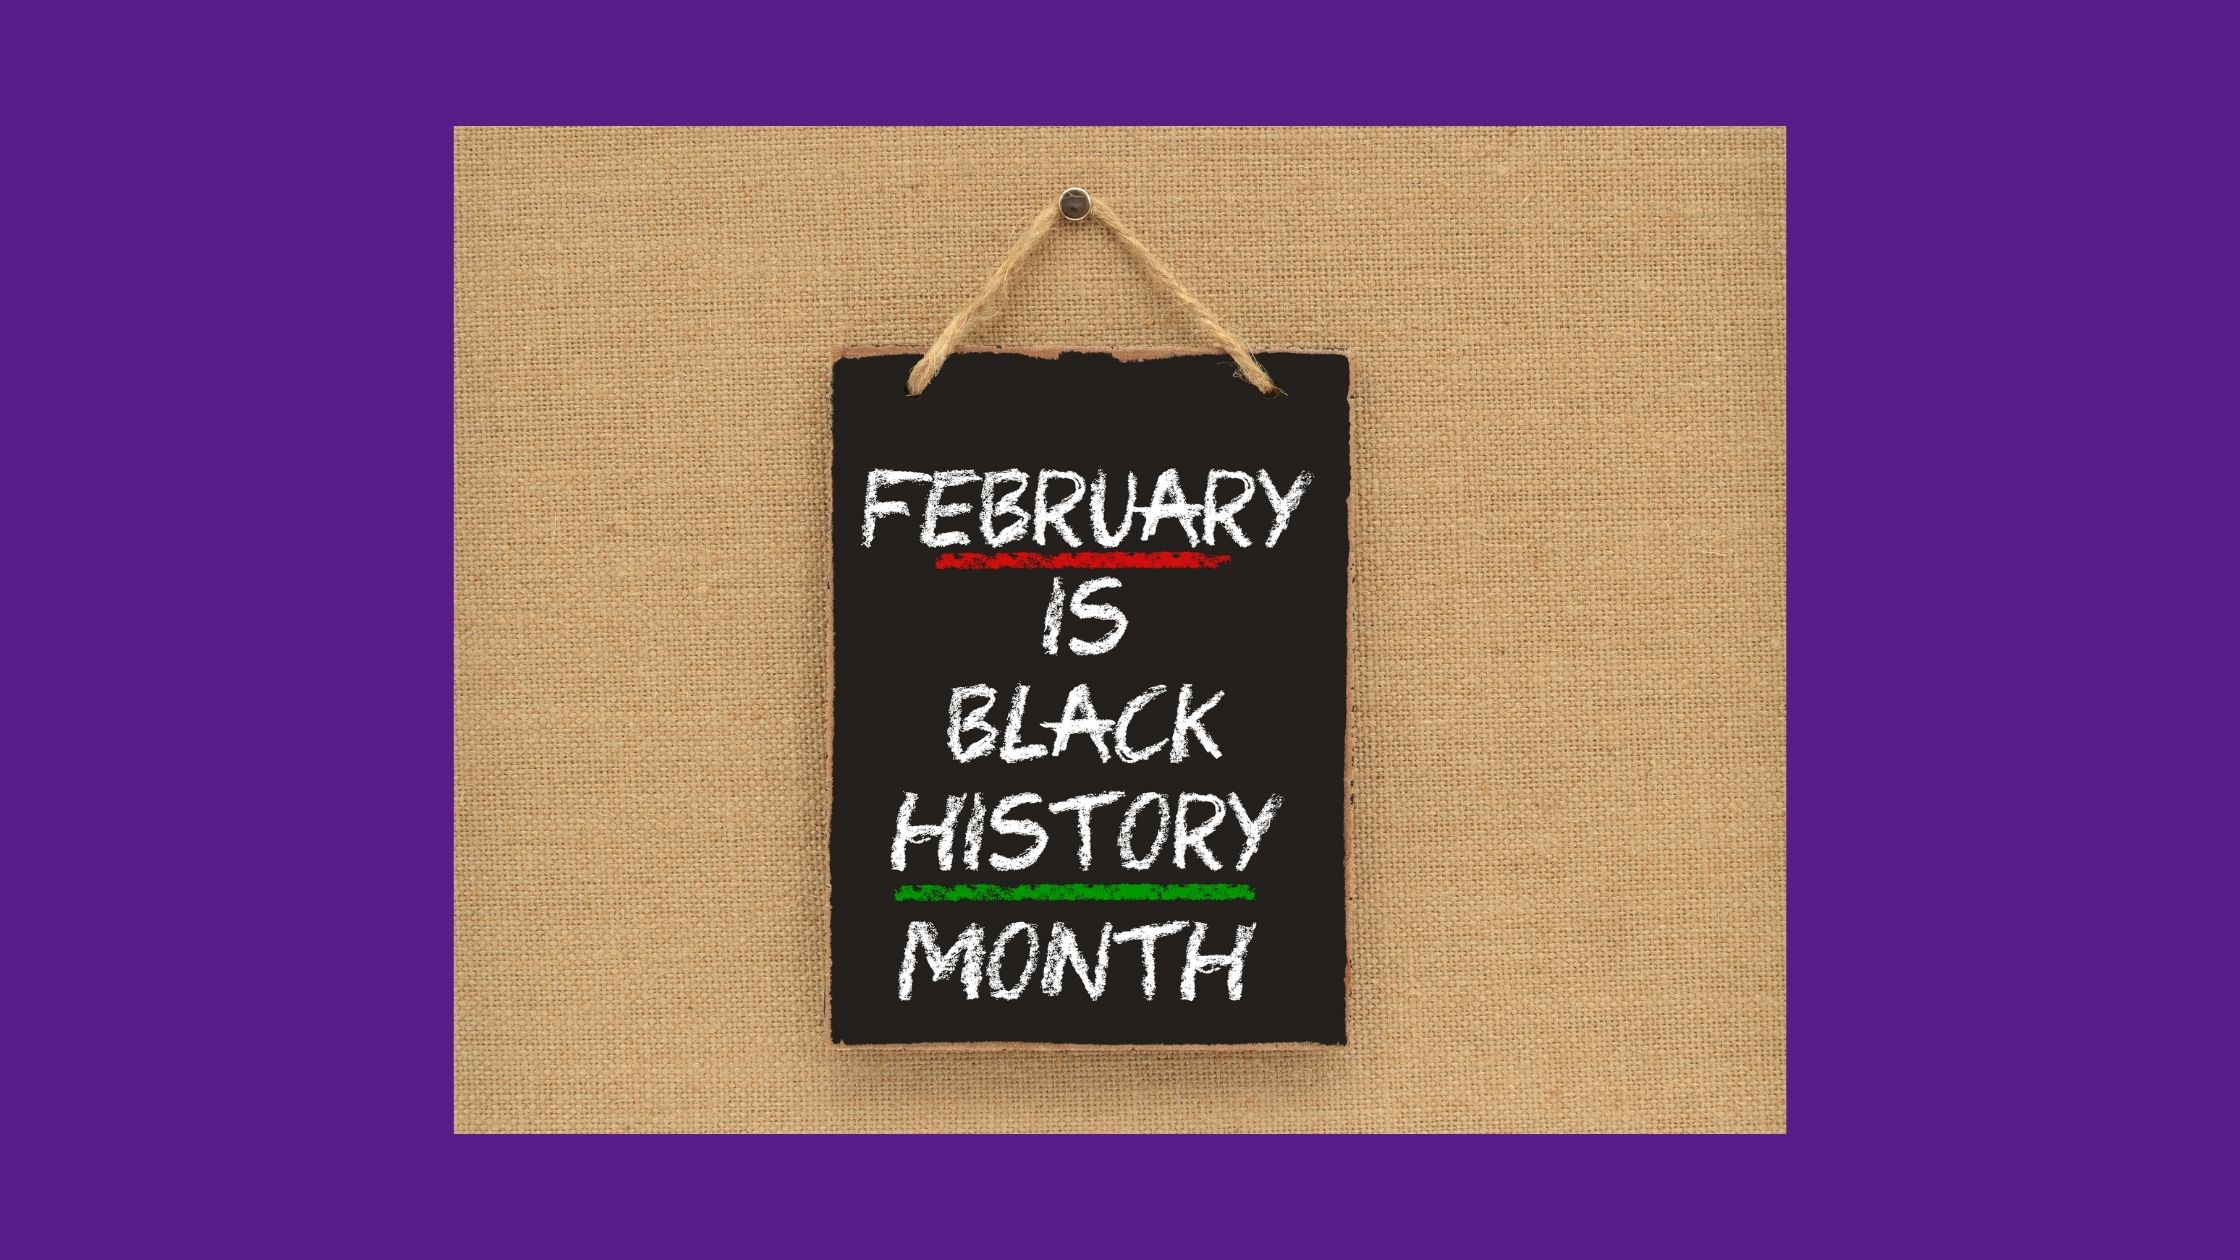 February is black history month